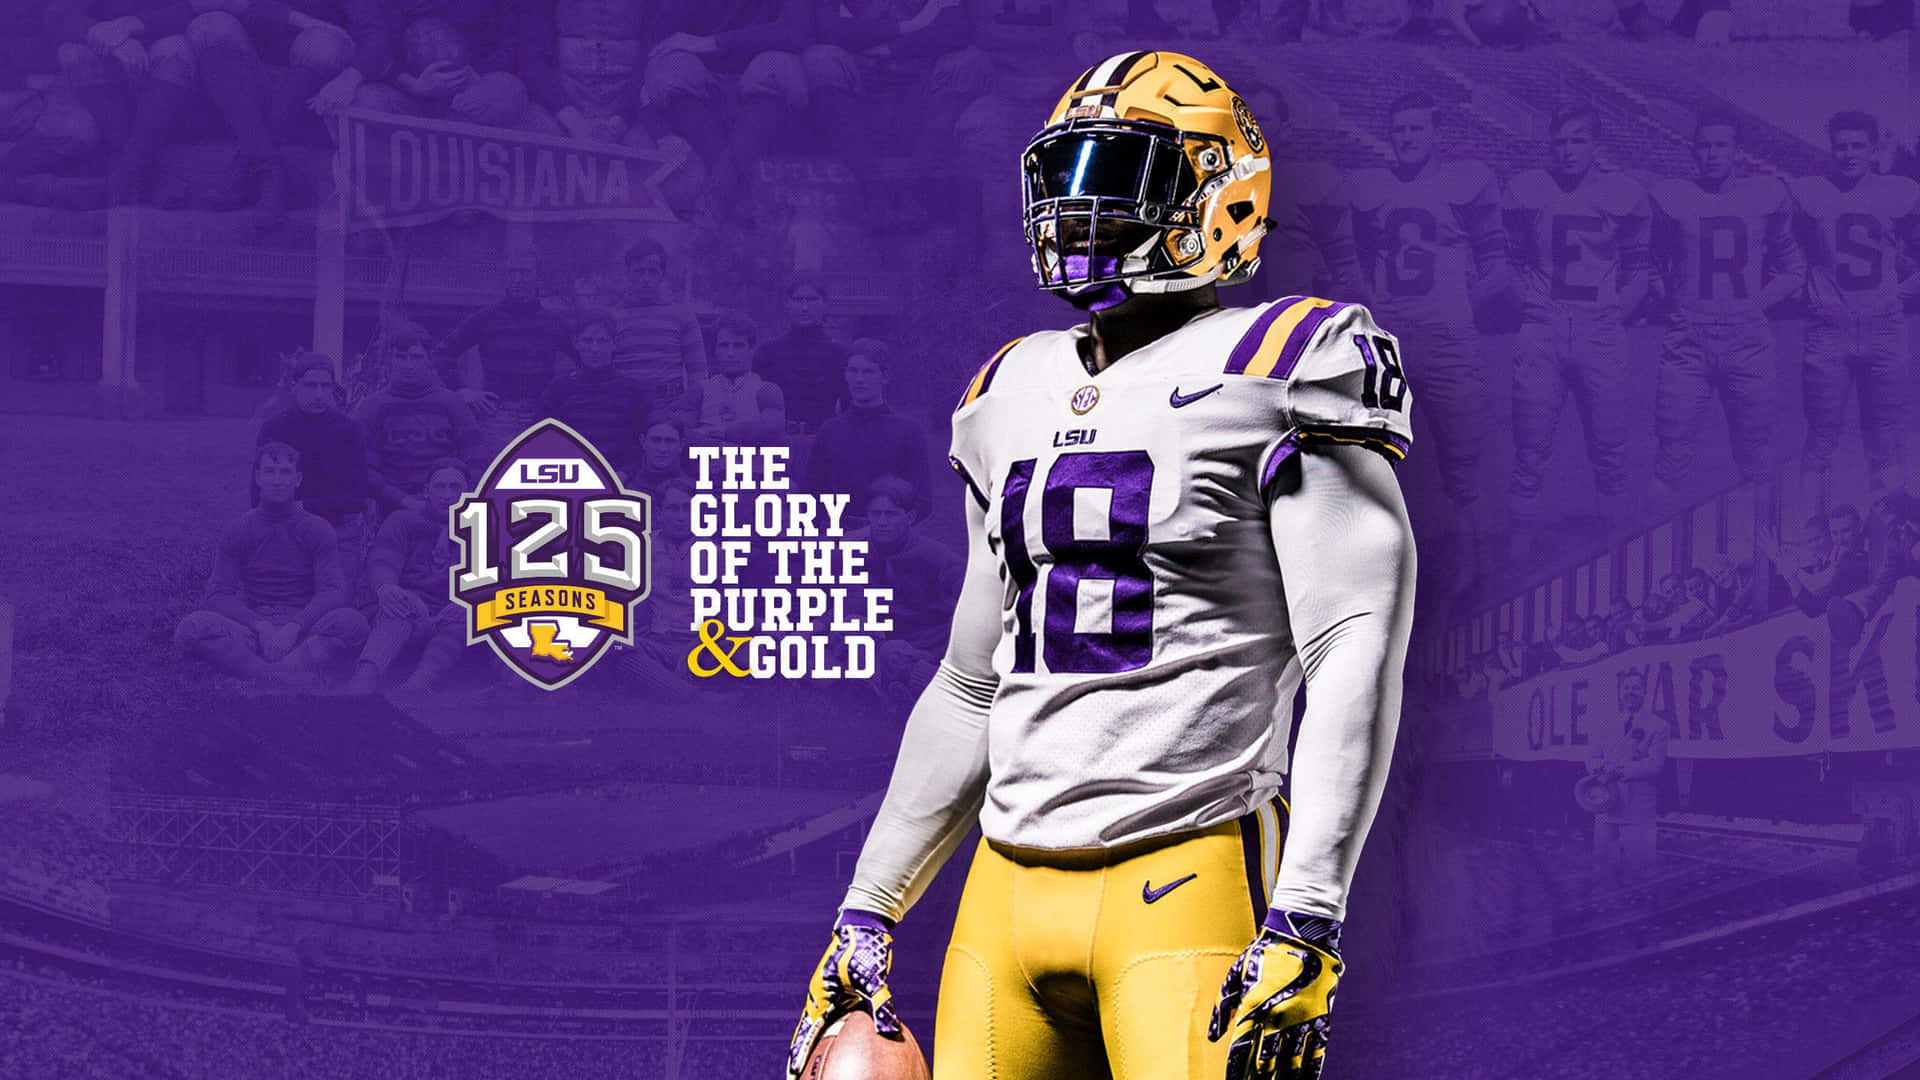 Celebrating victory with the LSU Tigers Wallpaper